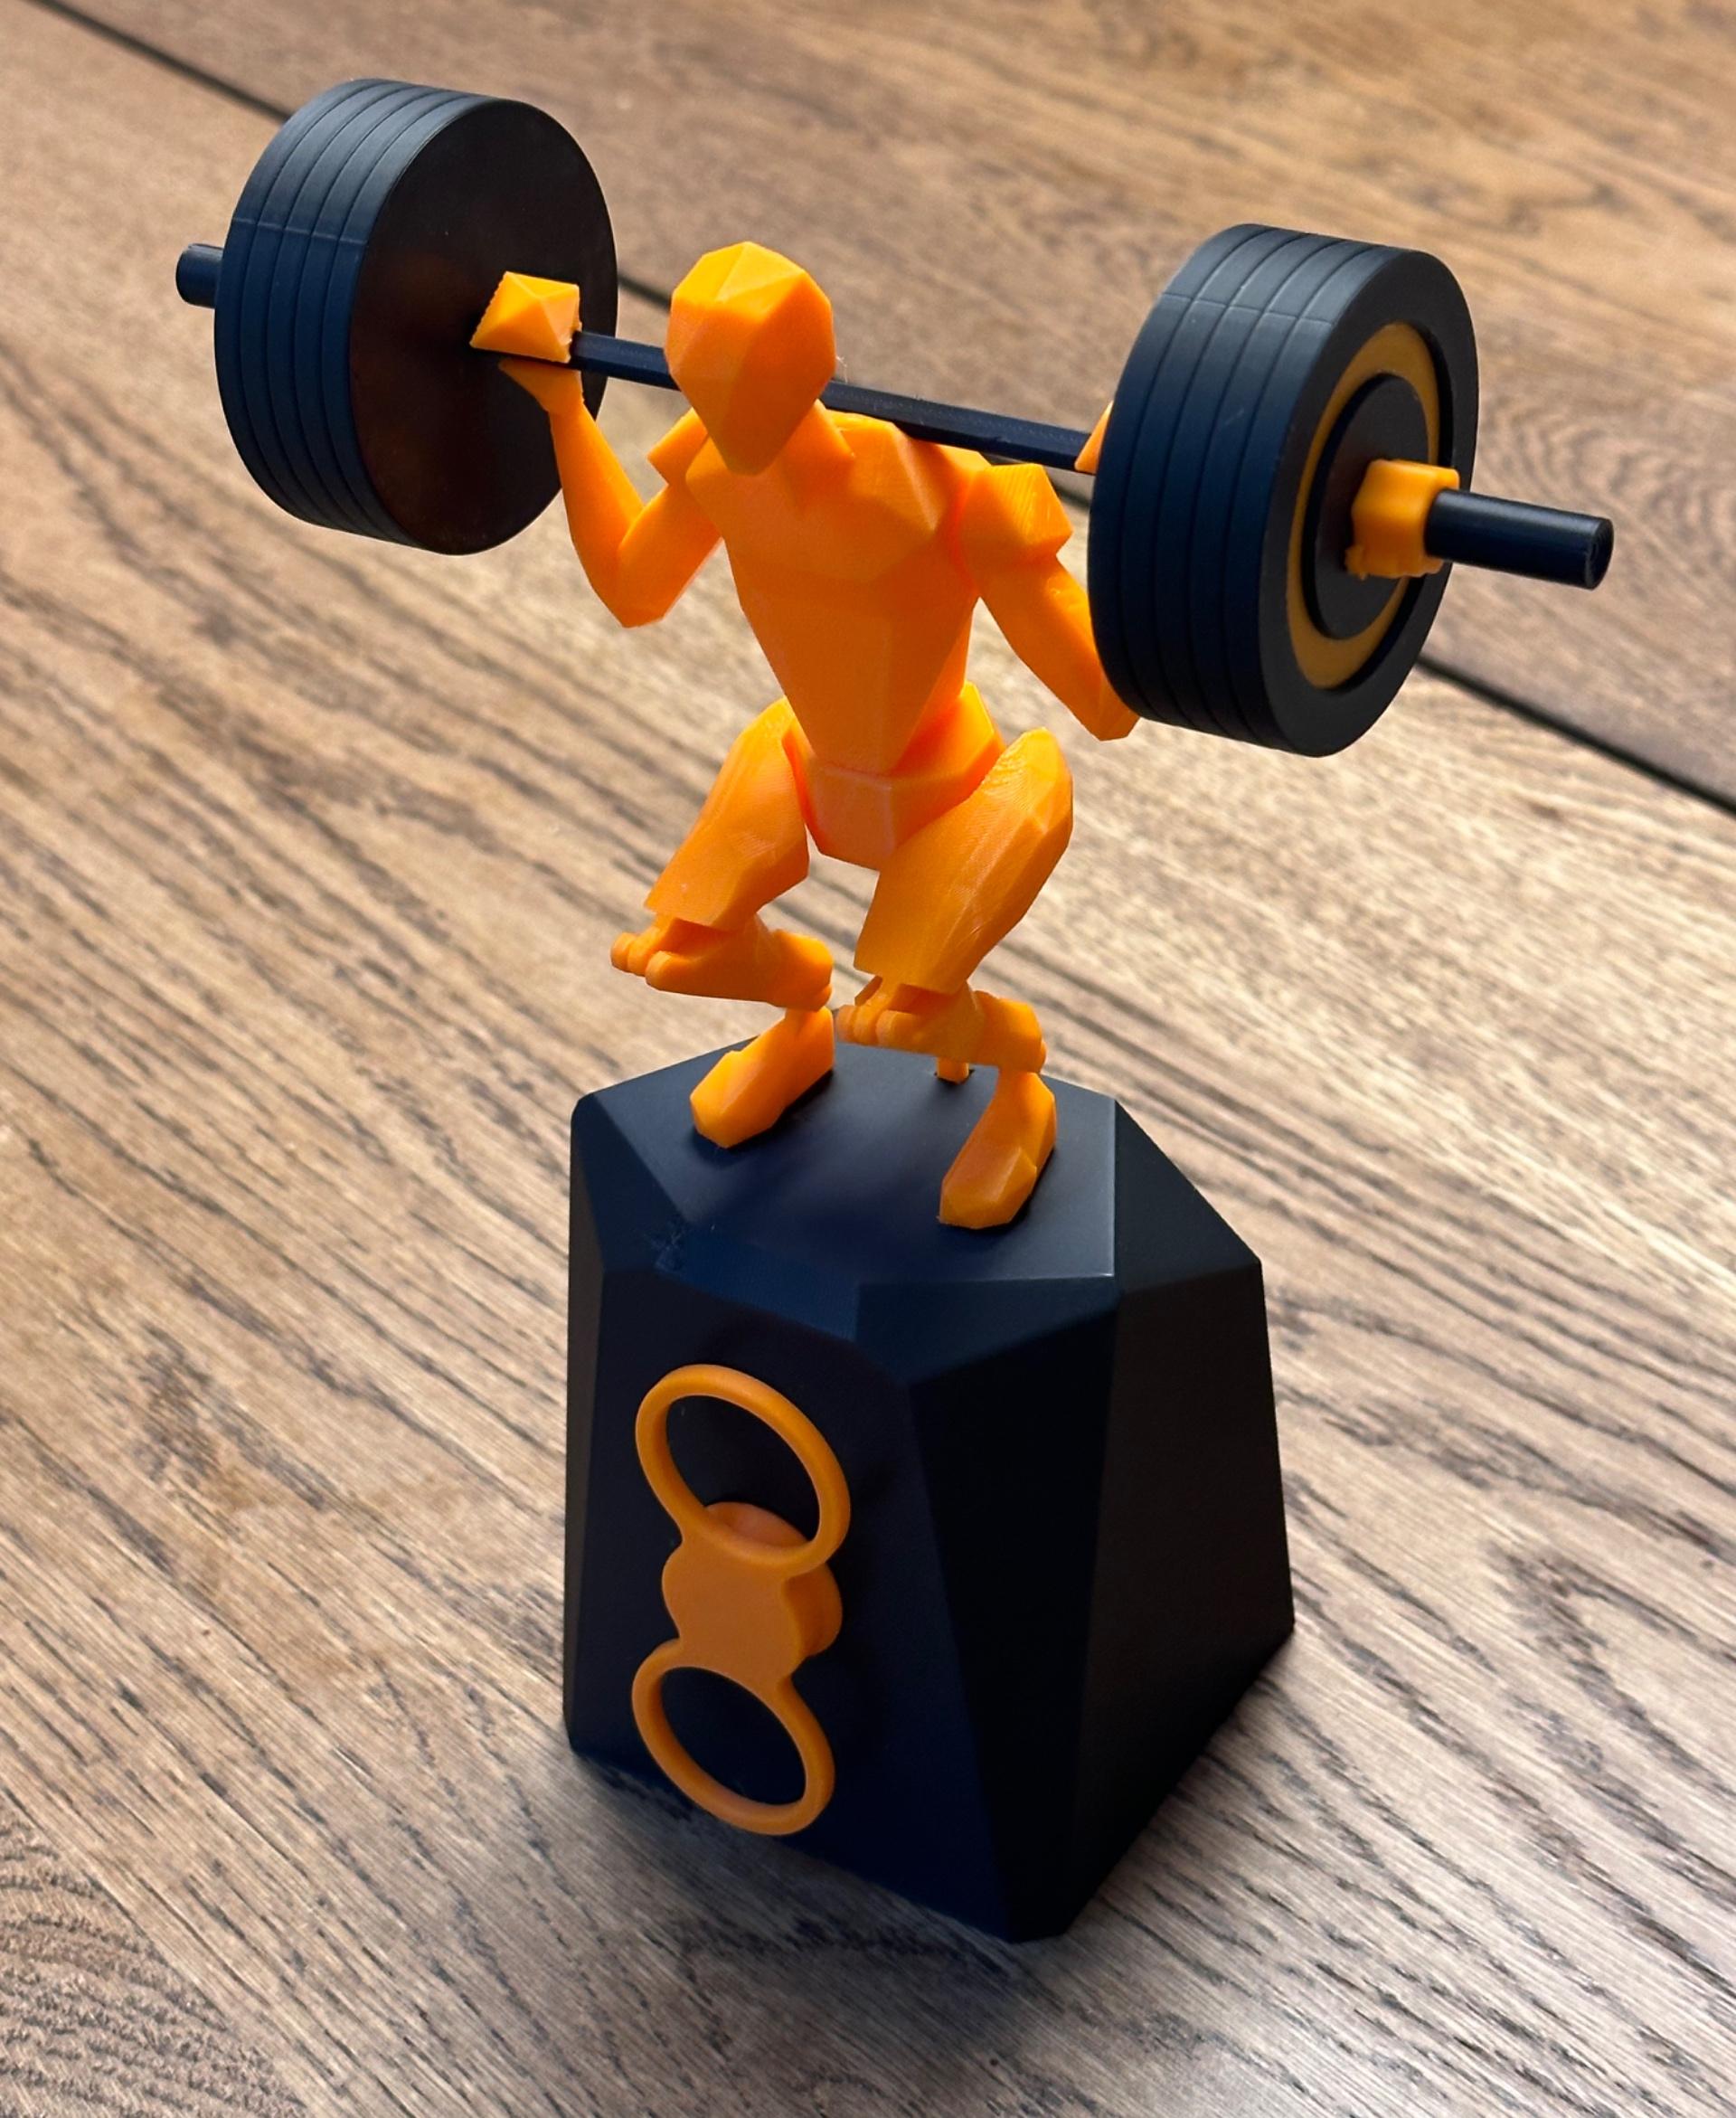 Squat Automata - Moving Sculpture - Printed on ender 3 in sunlu pla
Very fun model , really like it!  - 3d model